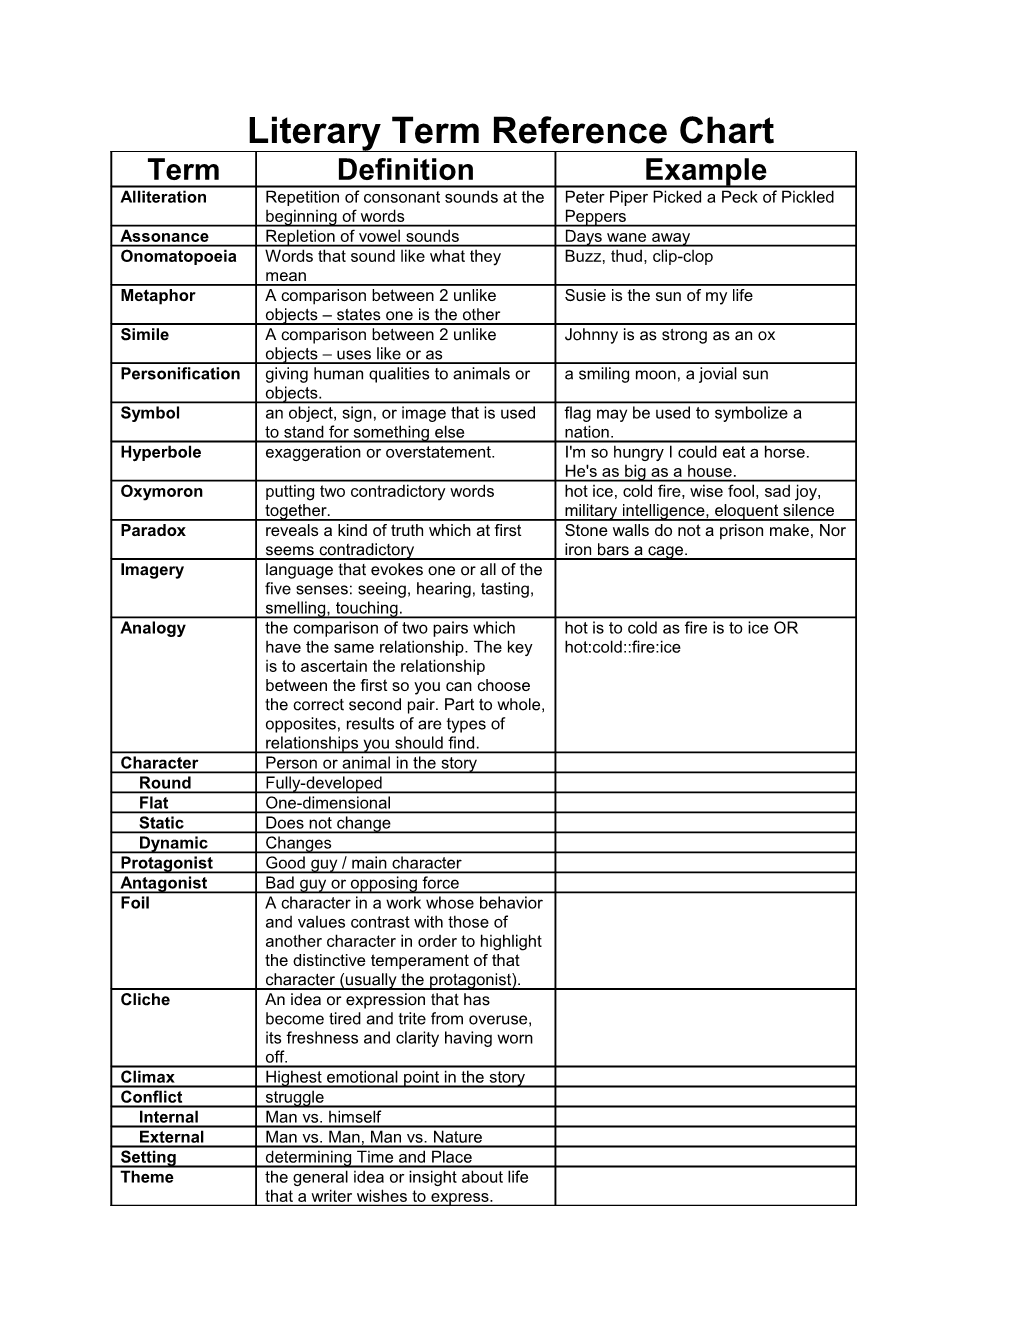 Literary Term Reference Chart